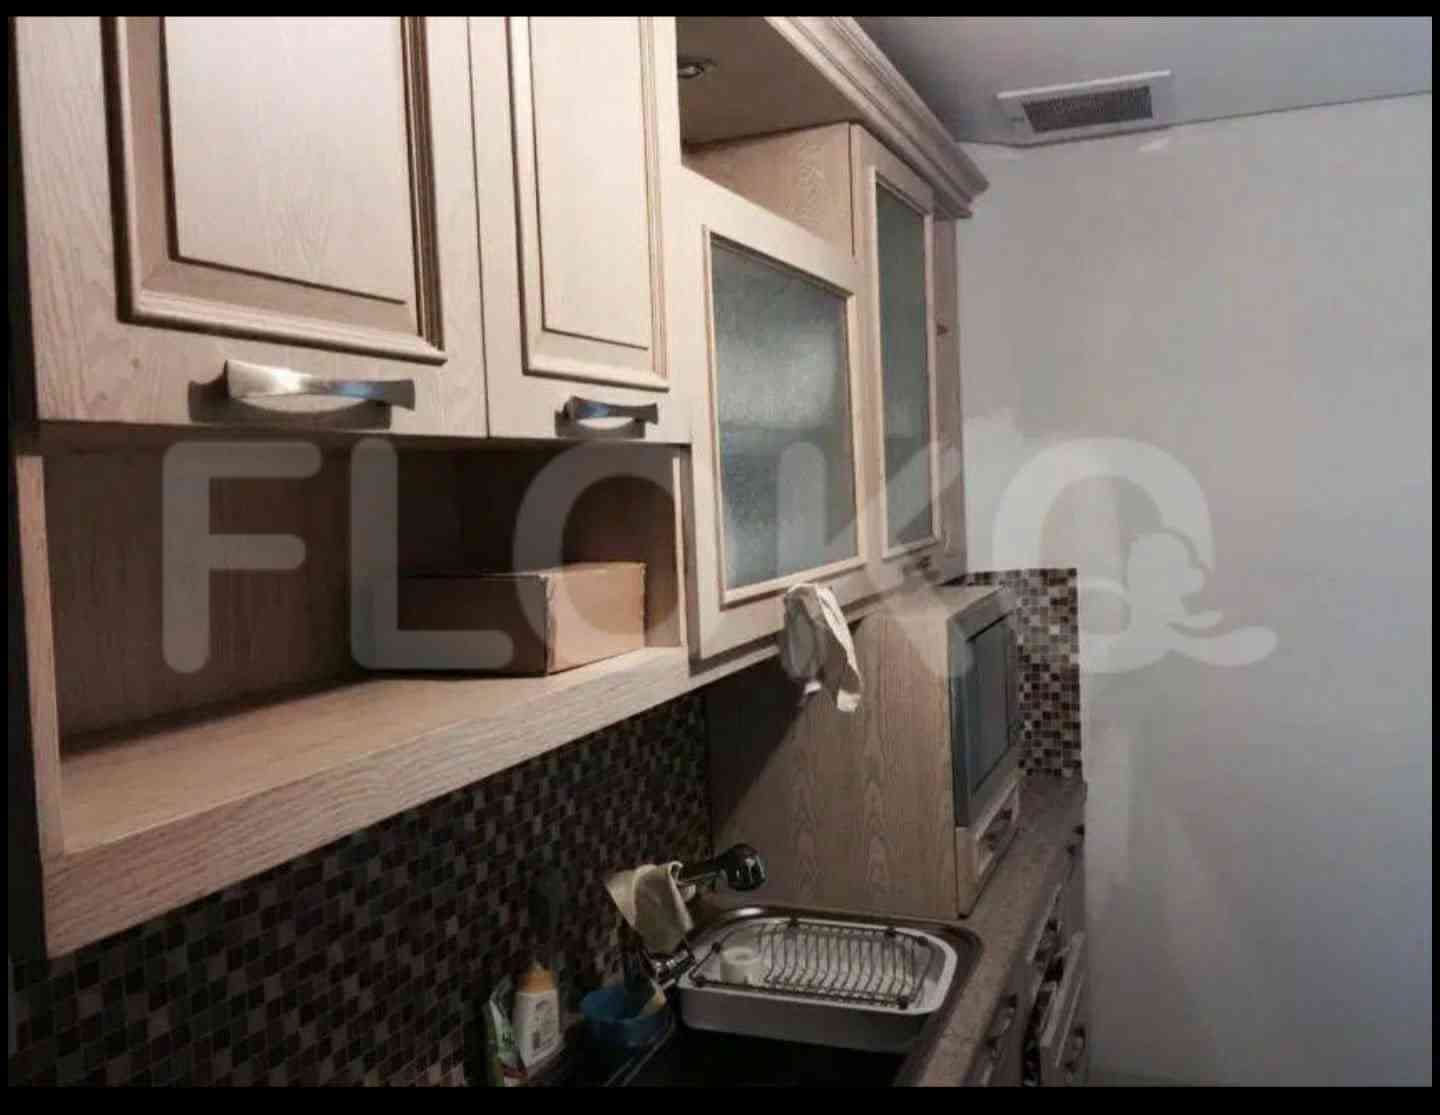 2 Bedroom on 17th Floor for Rent in Permata Hijau Residence - fpe3d7 5